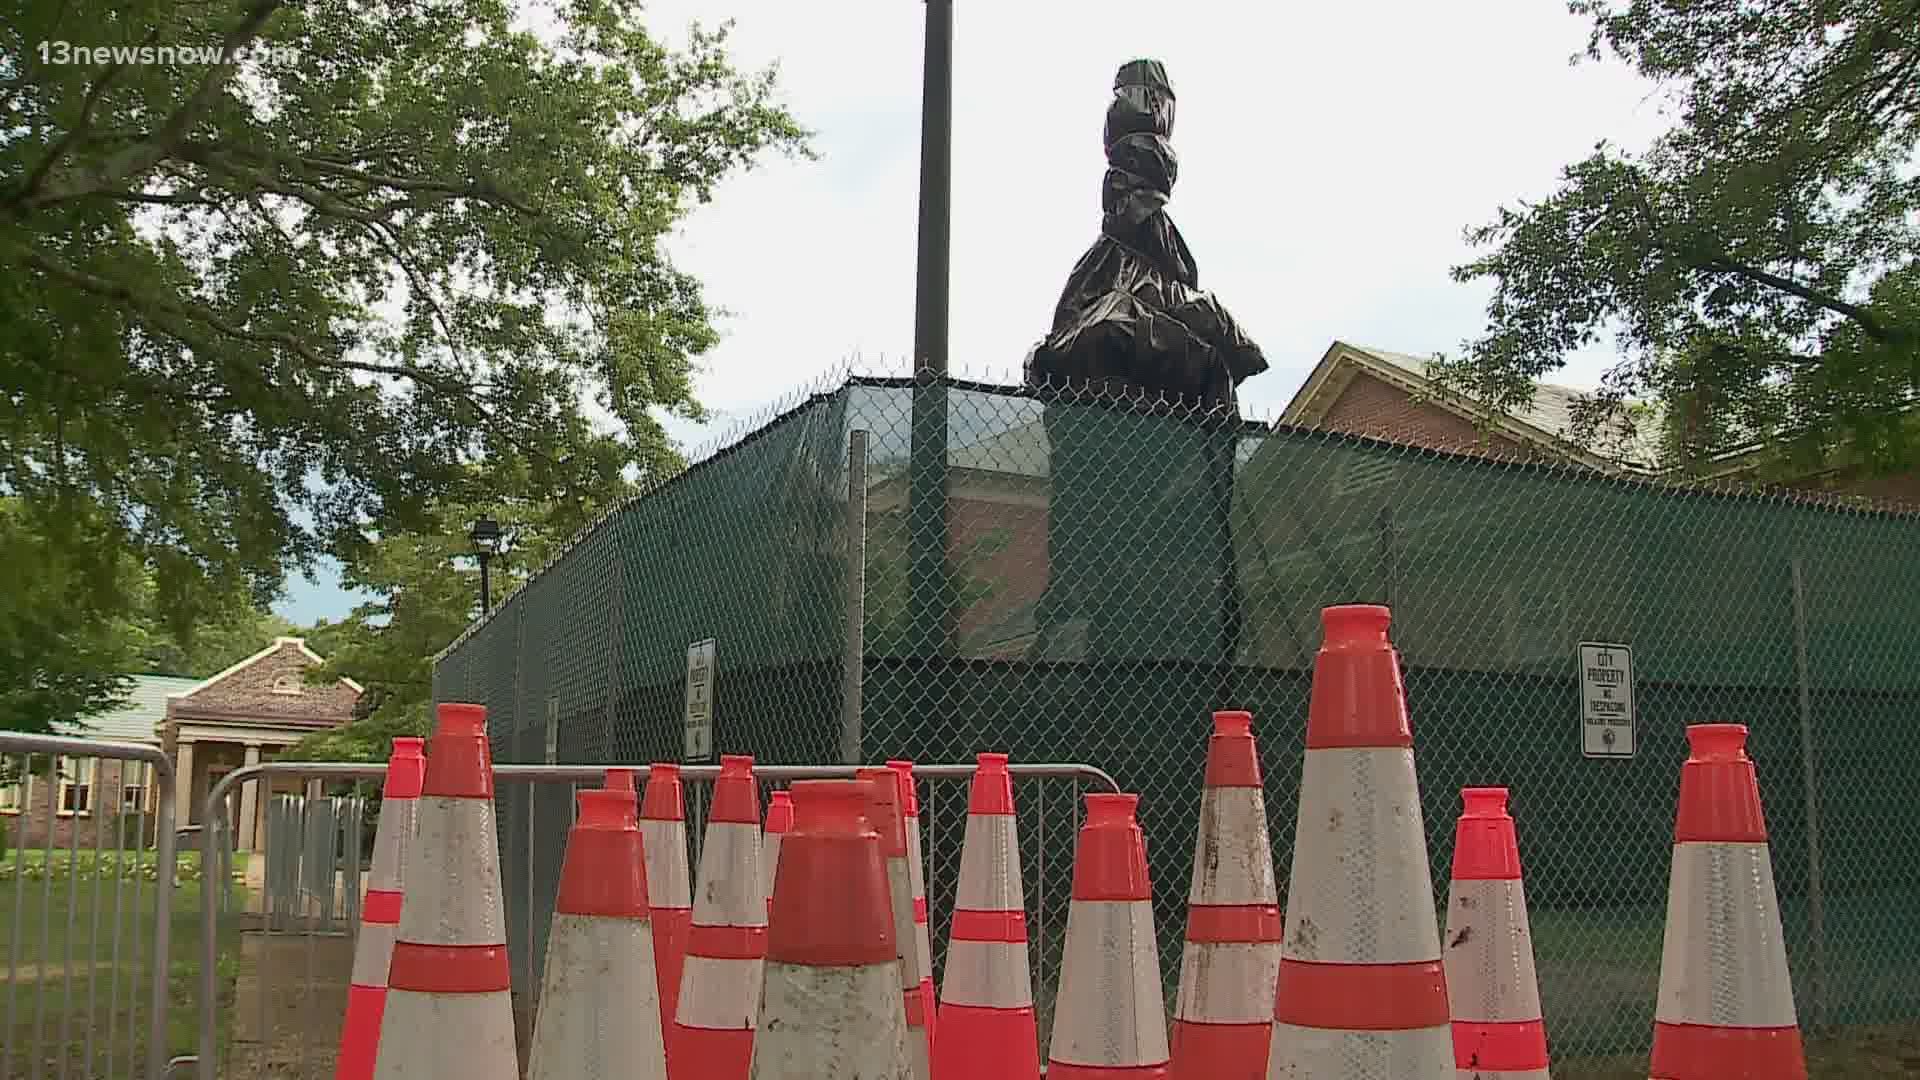 City Council is moving forward with the legal process of relocating the statue that has stood at the Old Princess Anne County Courthouse since the early 1900s.